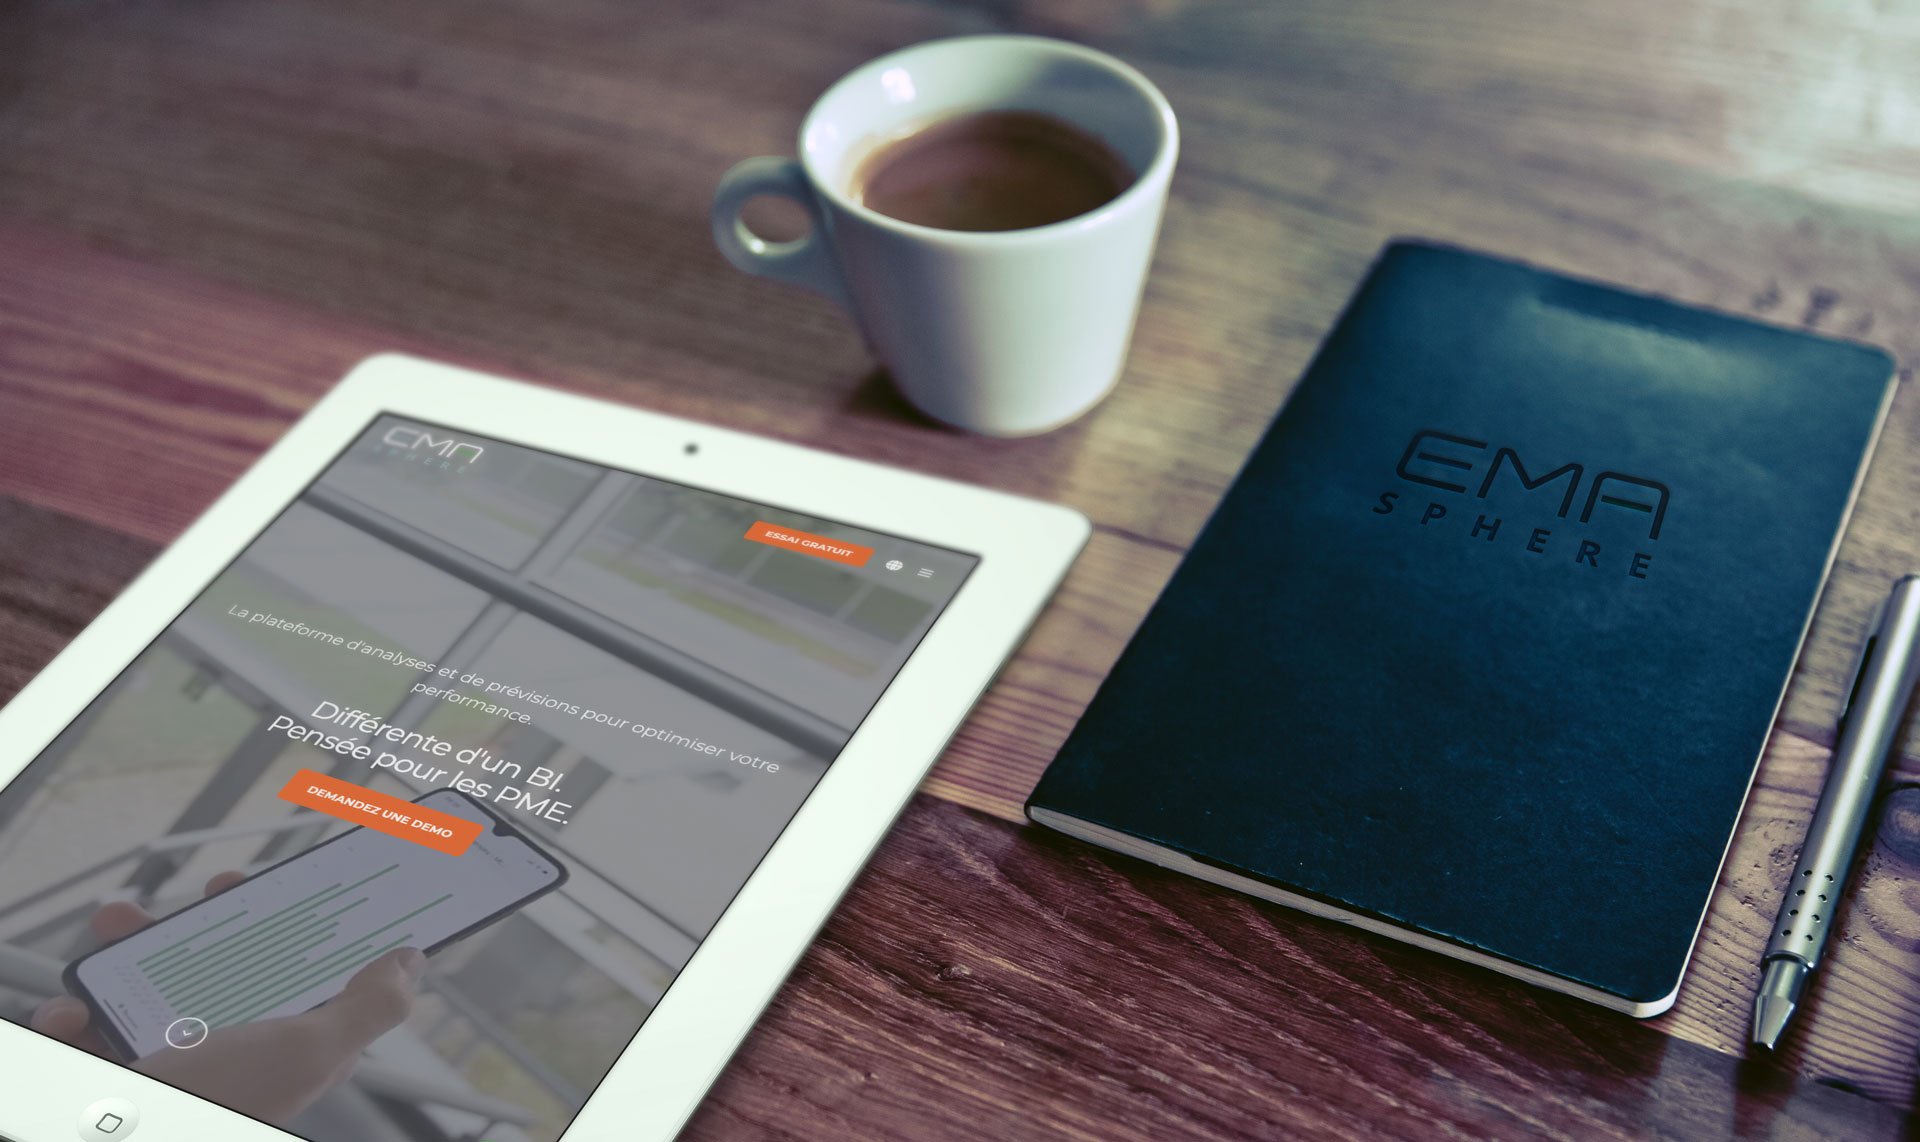 EMAsphere-iPad-home-page-notebook